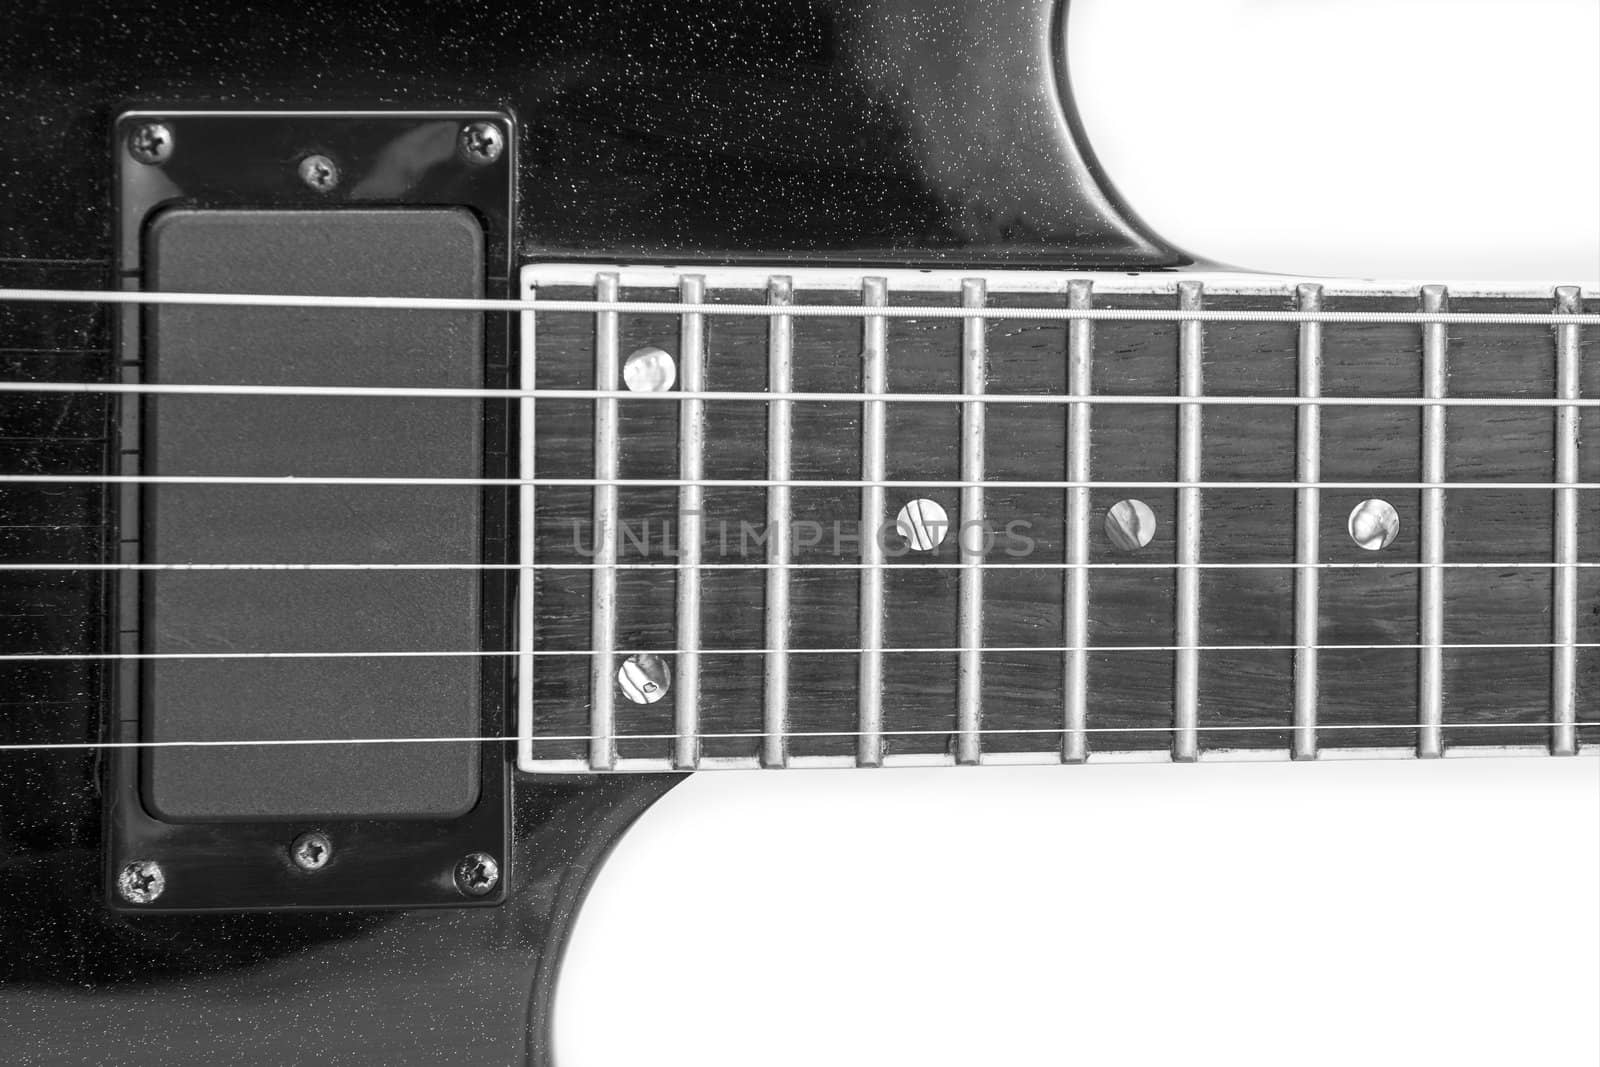 Electric guitar detail shots over white backdrop